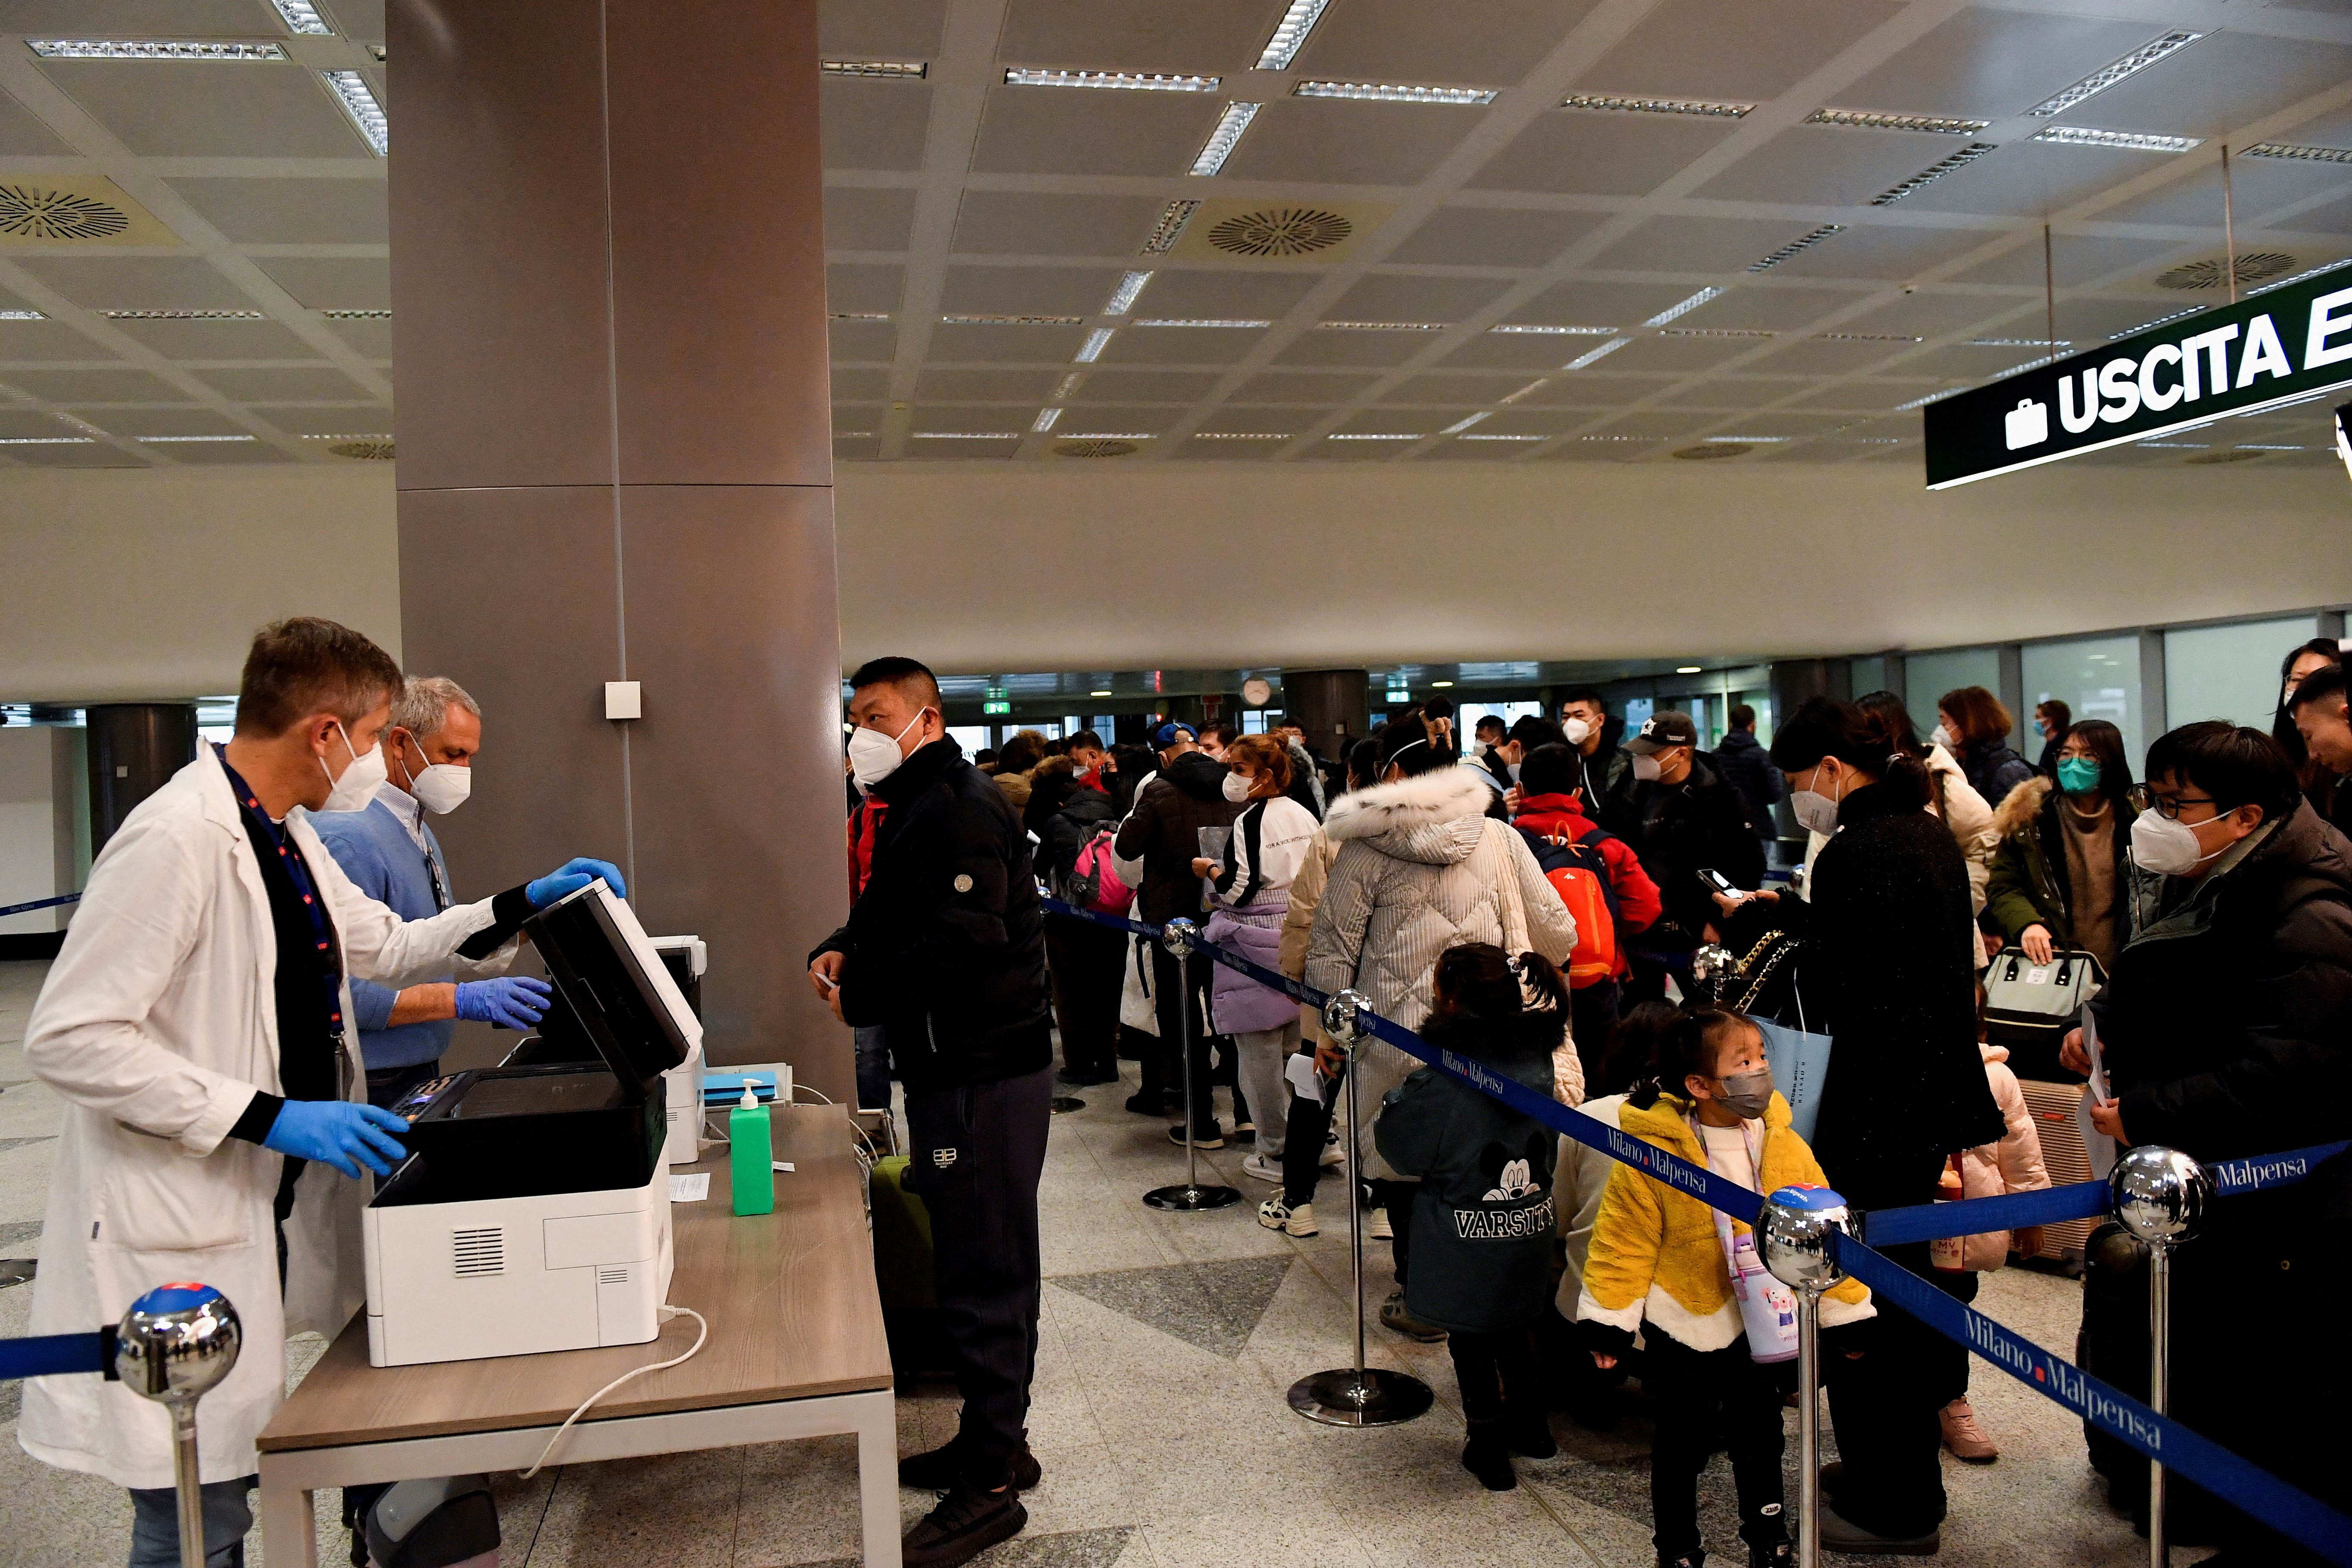 Italy imposes mandatory COVID-19 tests on travelers from China